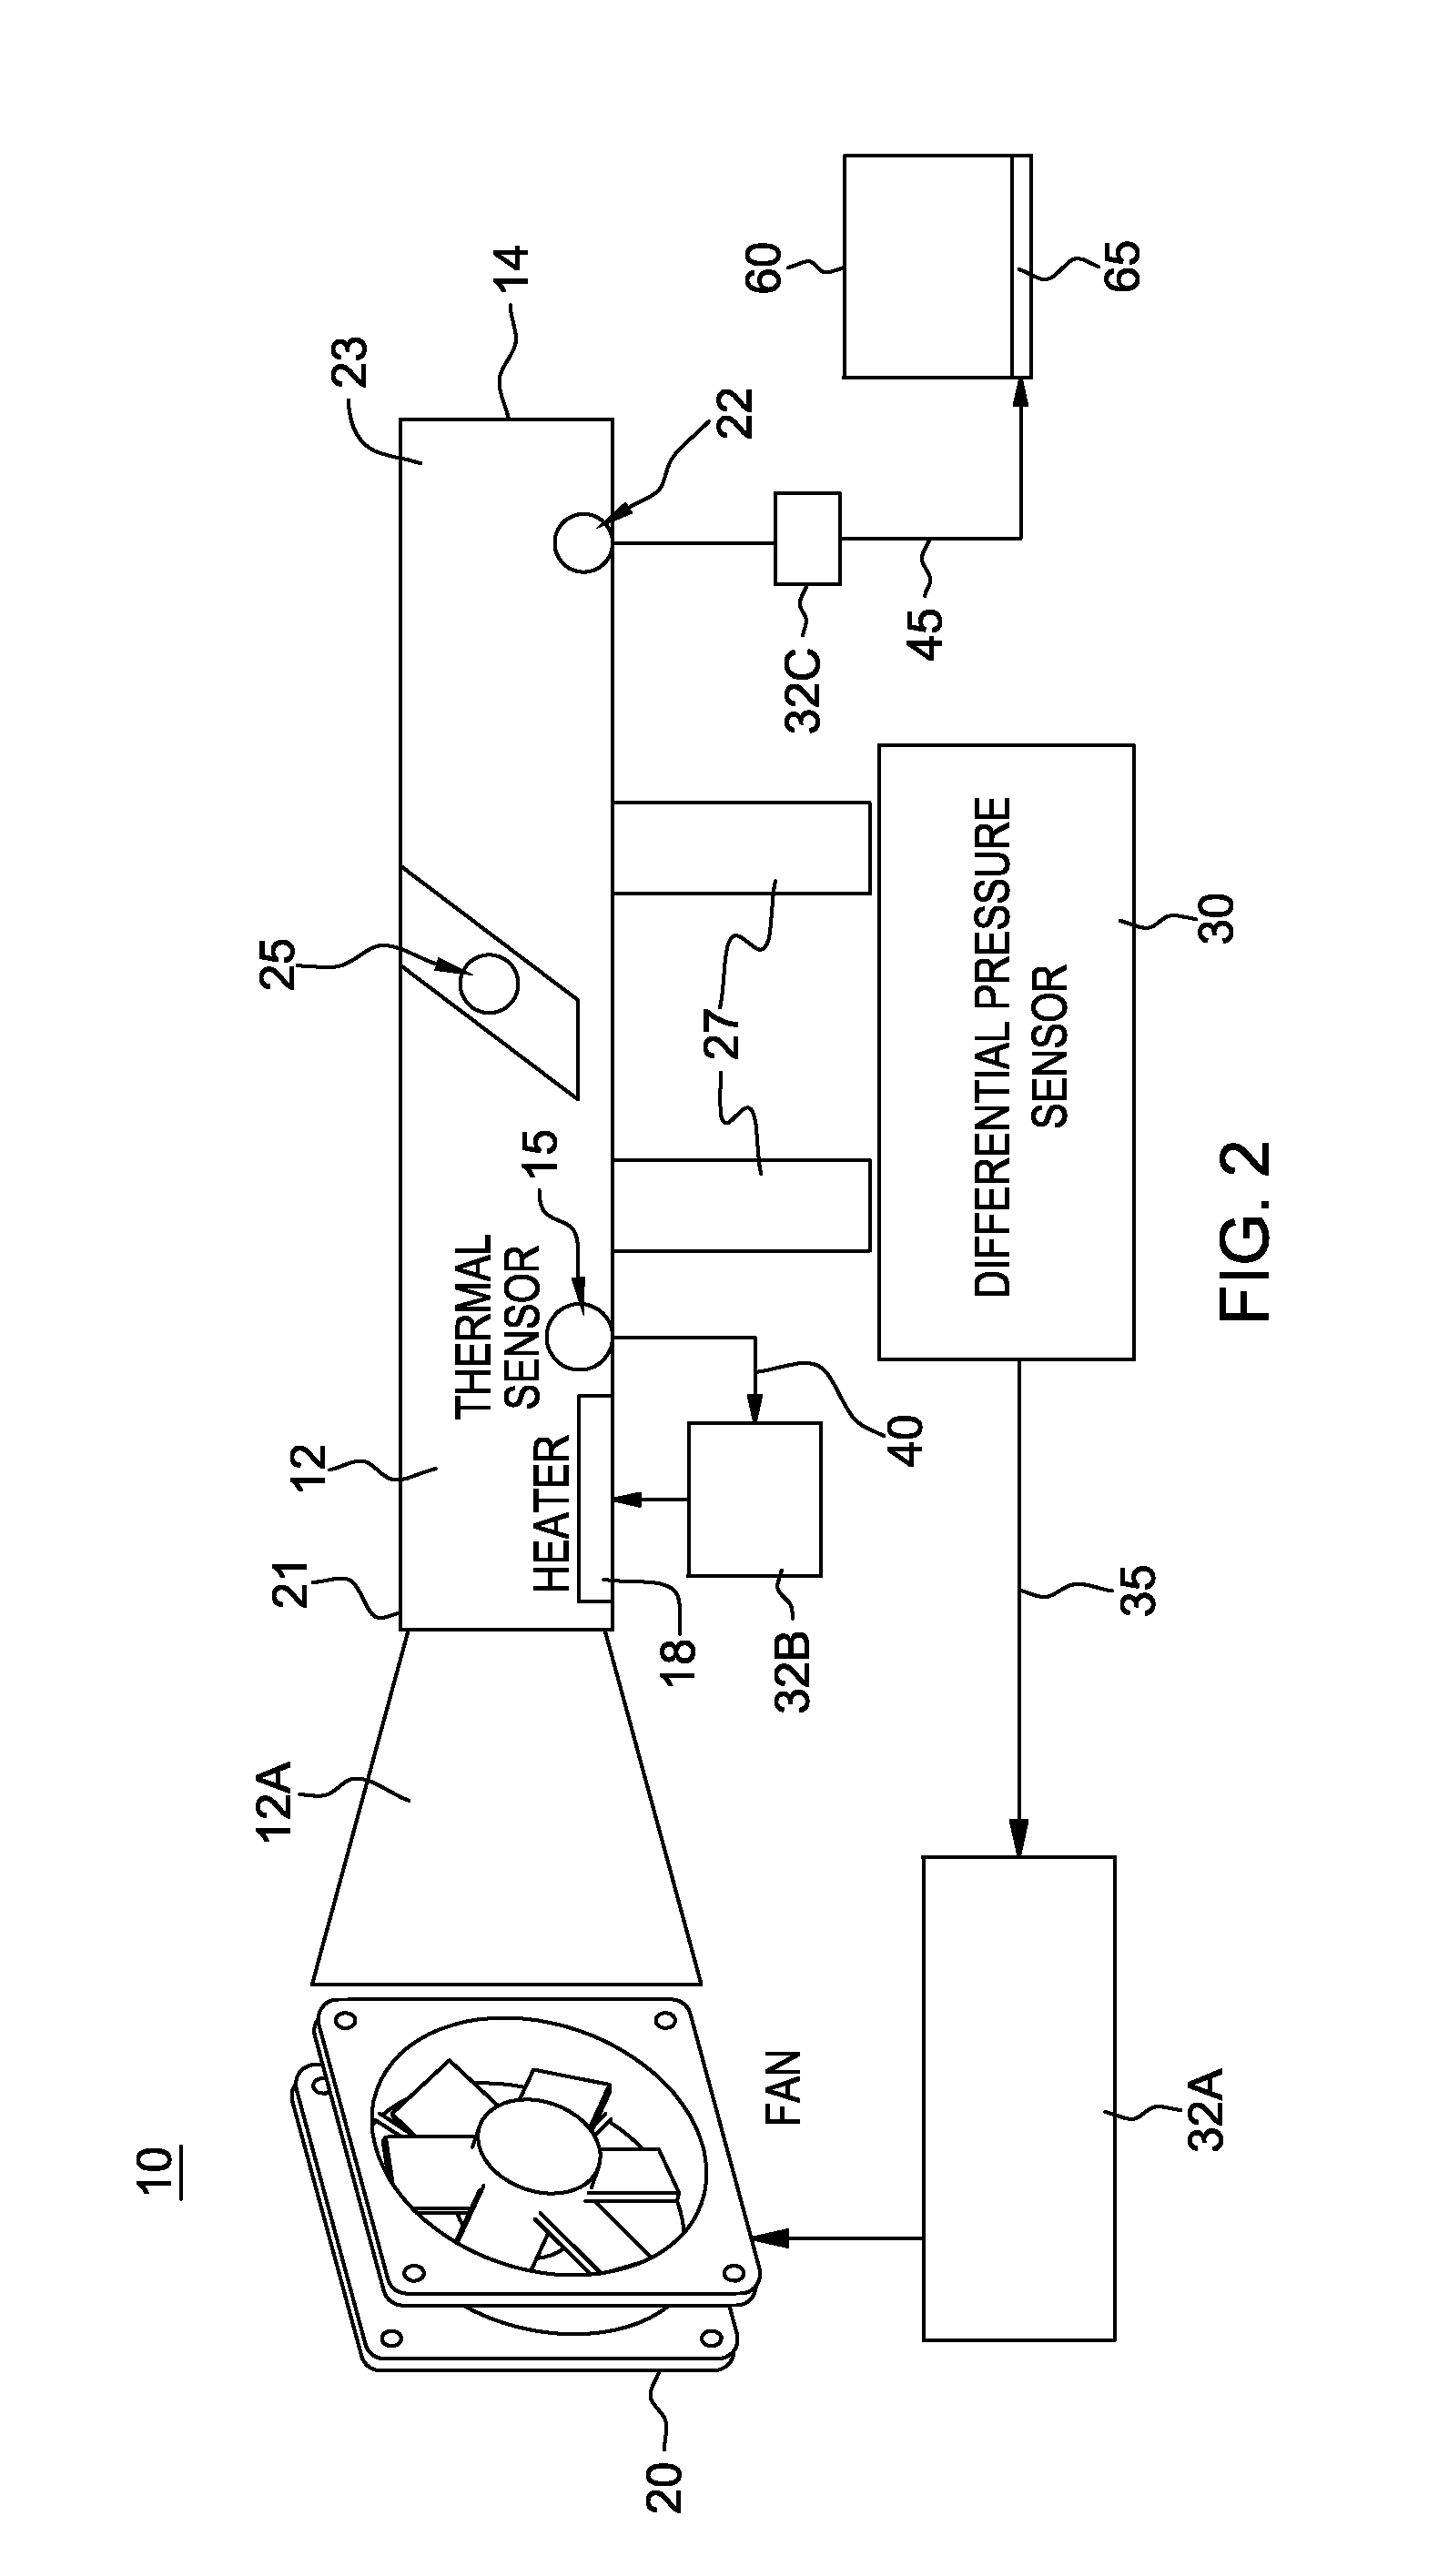 Corrosion detector apparatus for universal assessment of pollution in data centers